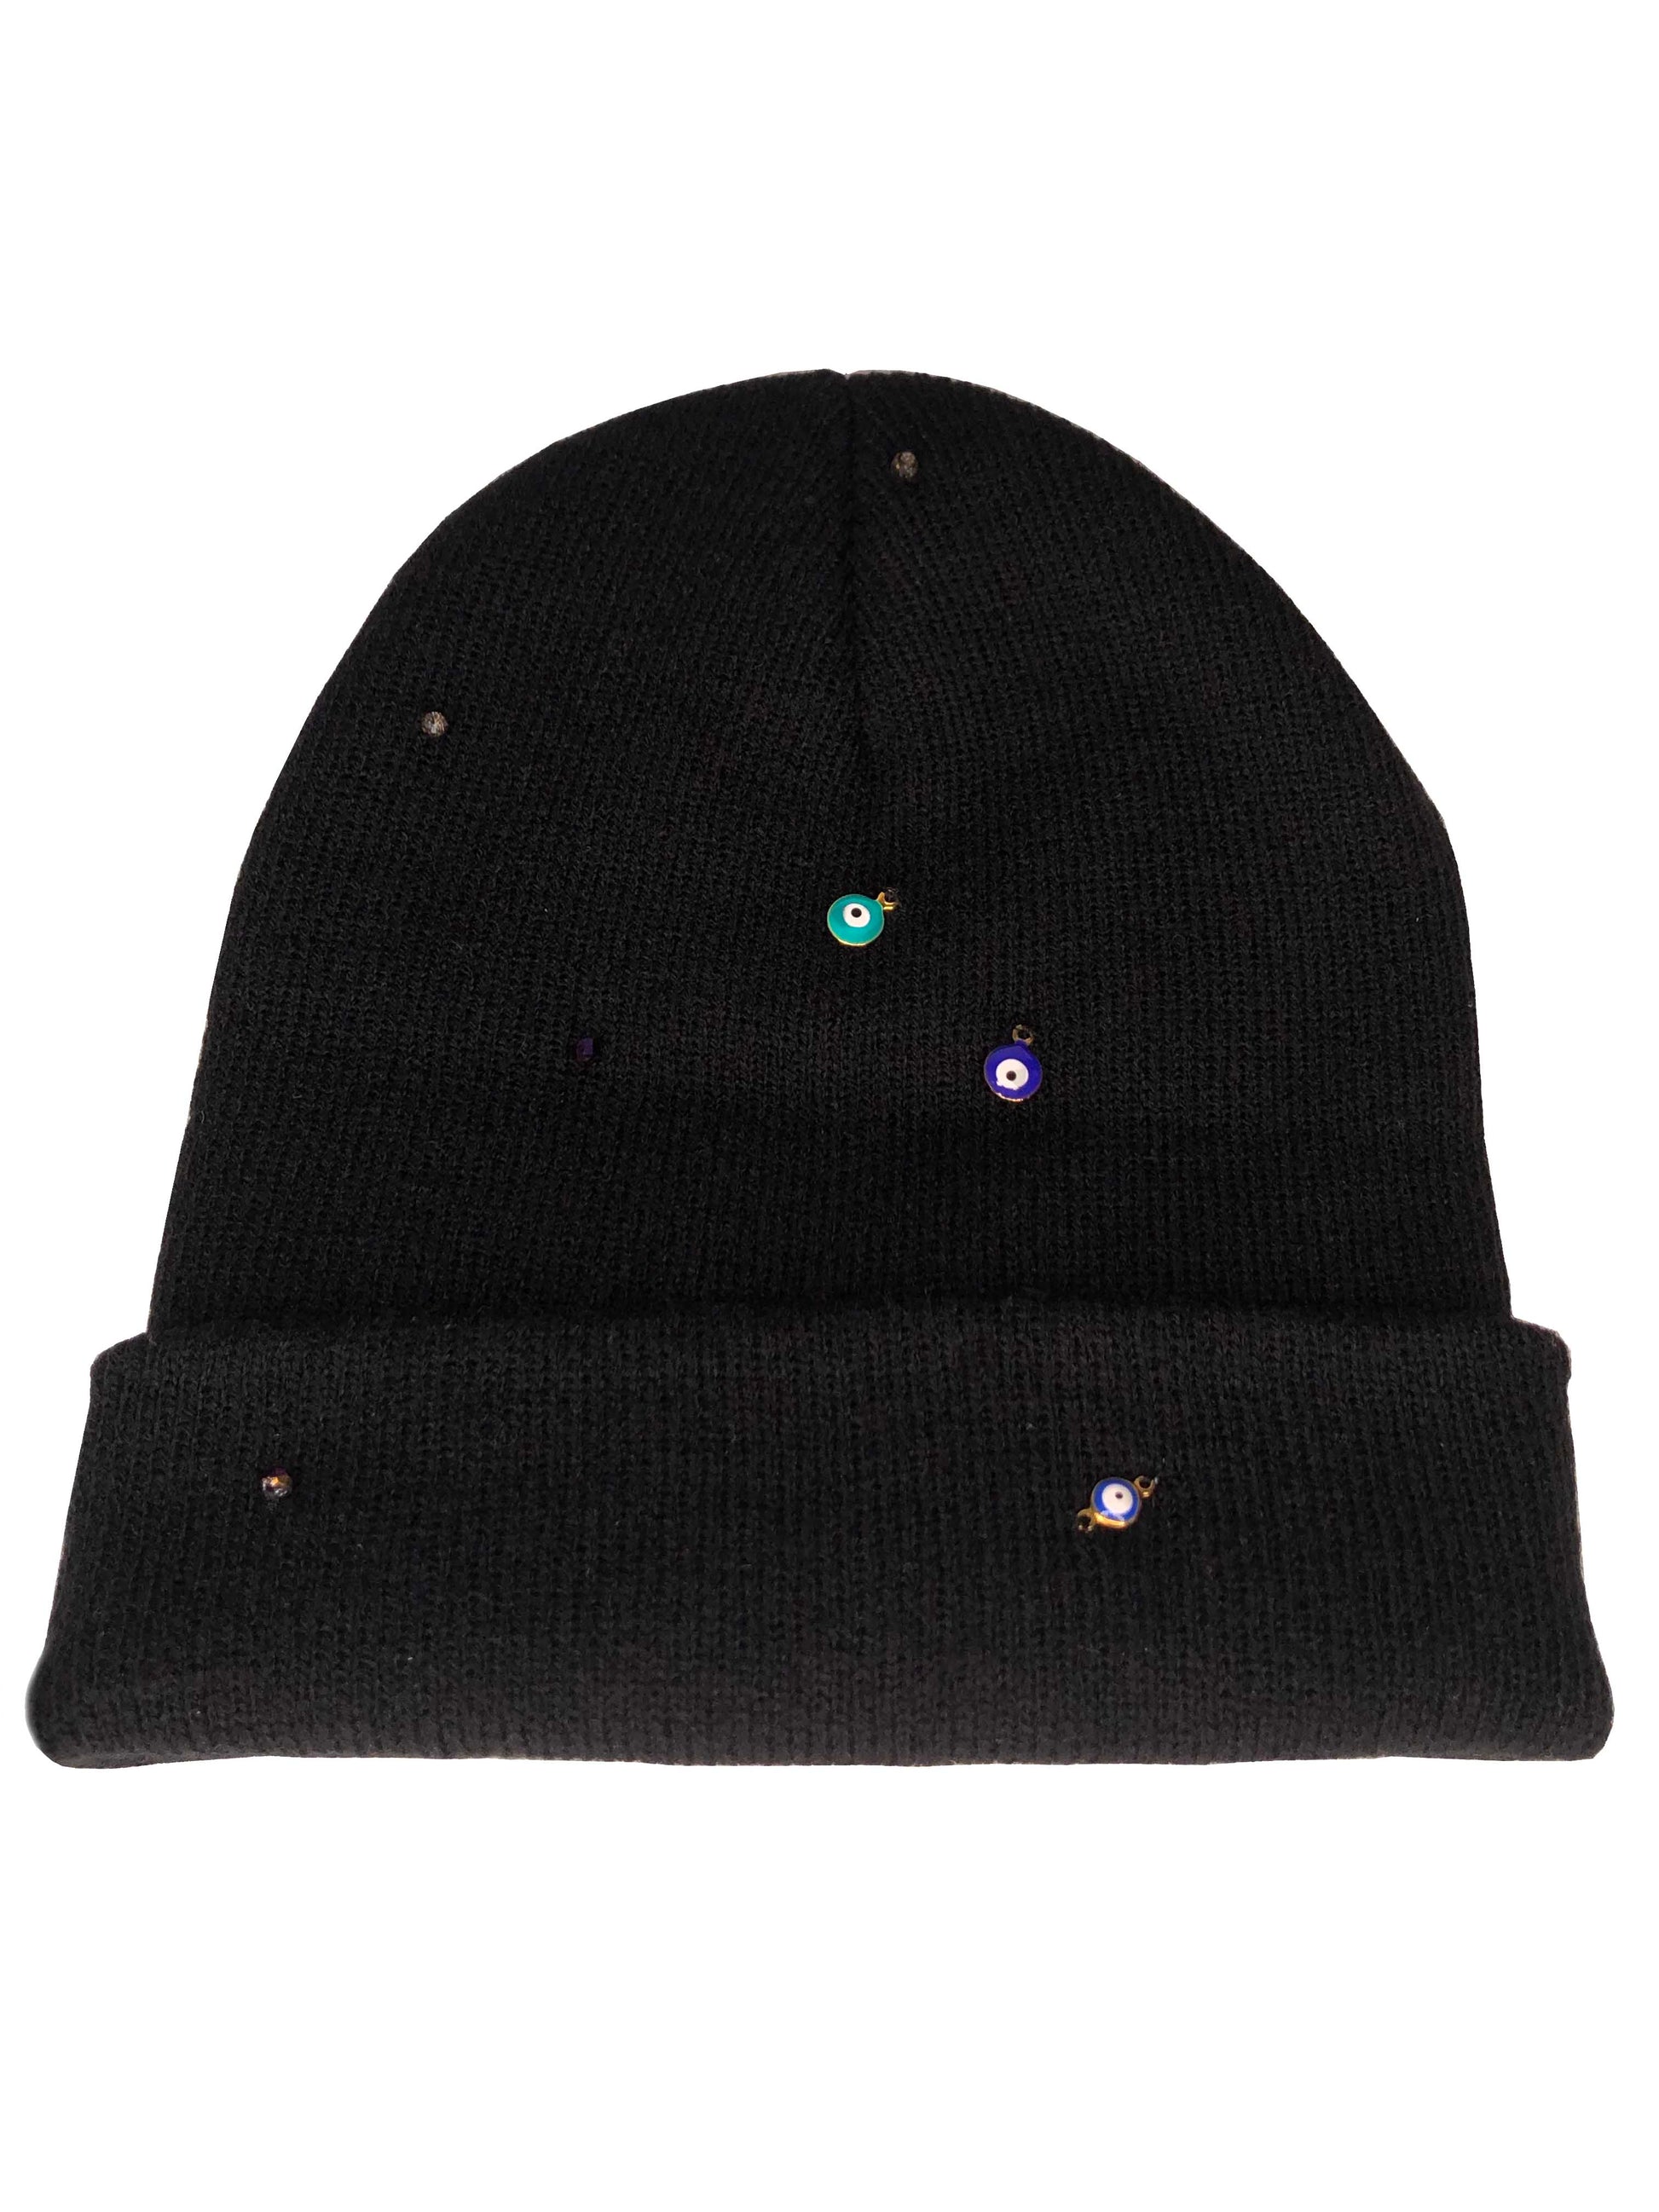 A black beanie accessorized using evil eye charms and crystal beads.